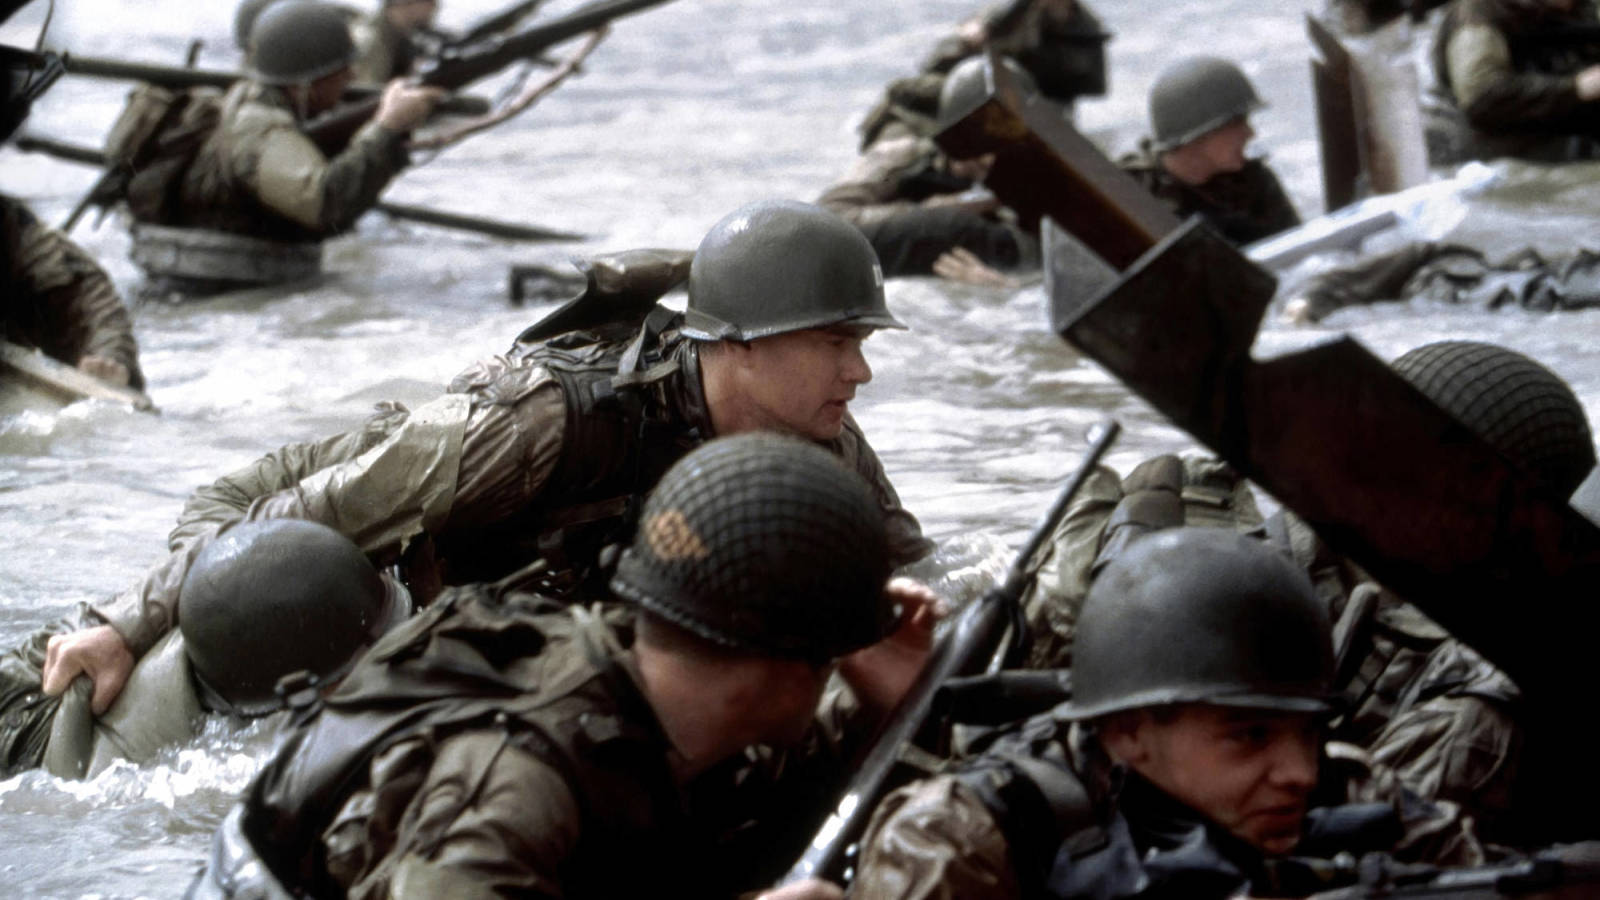 facts you might not know about 'Saving Private Ryan'